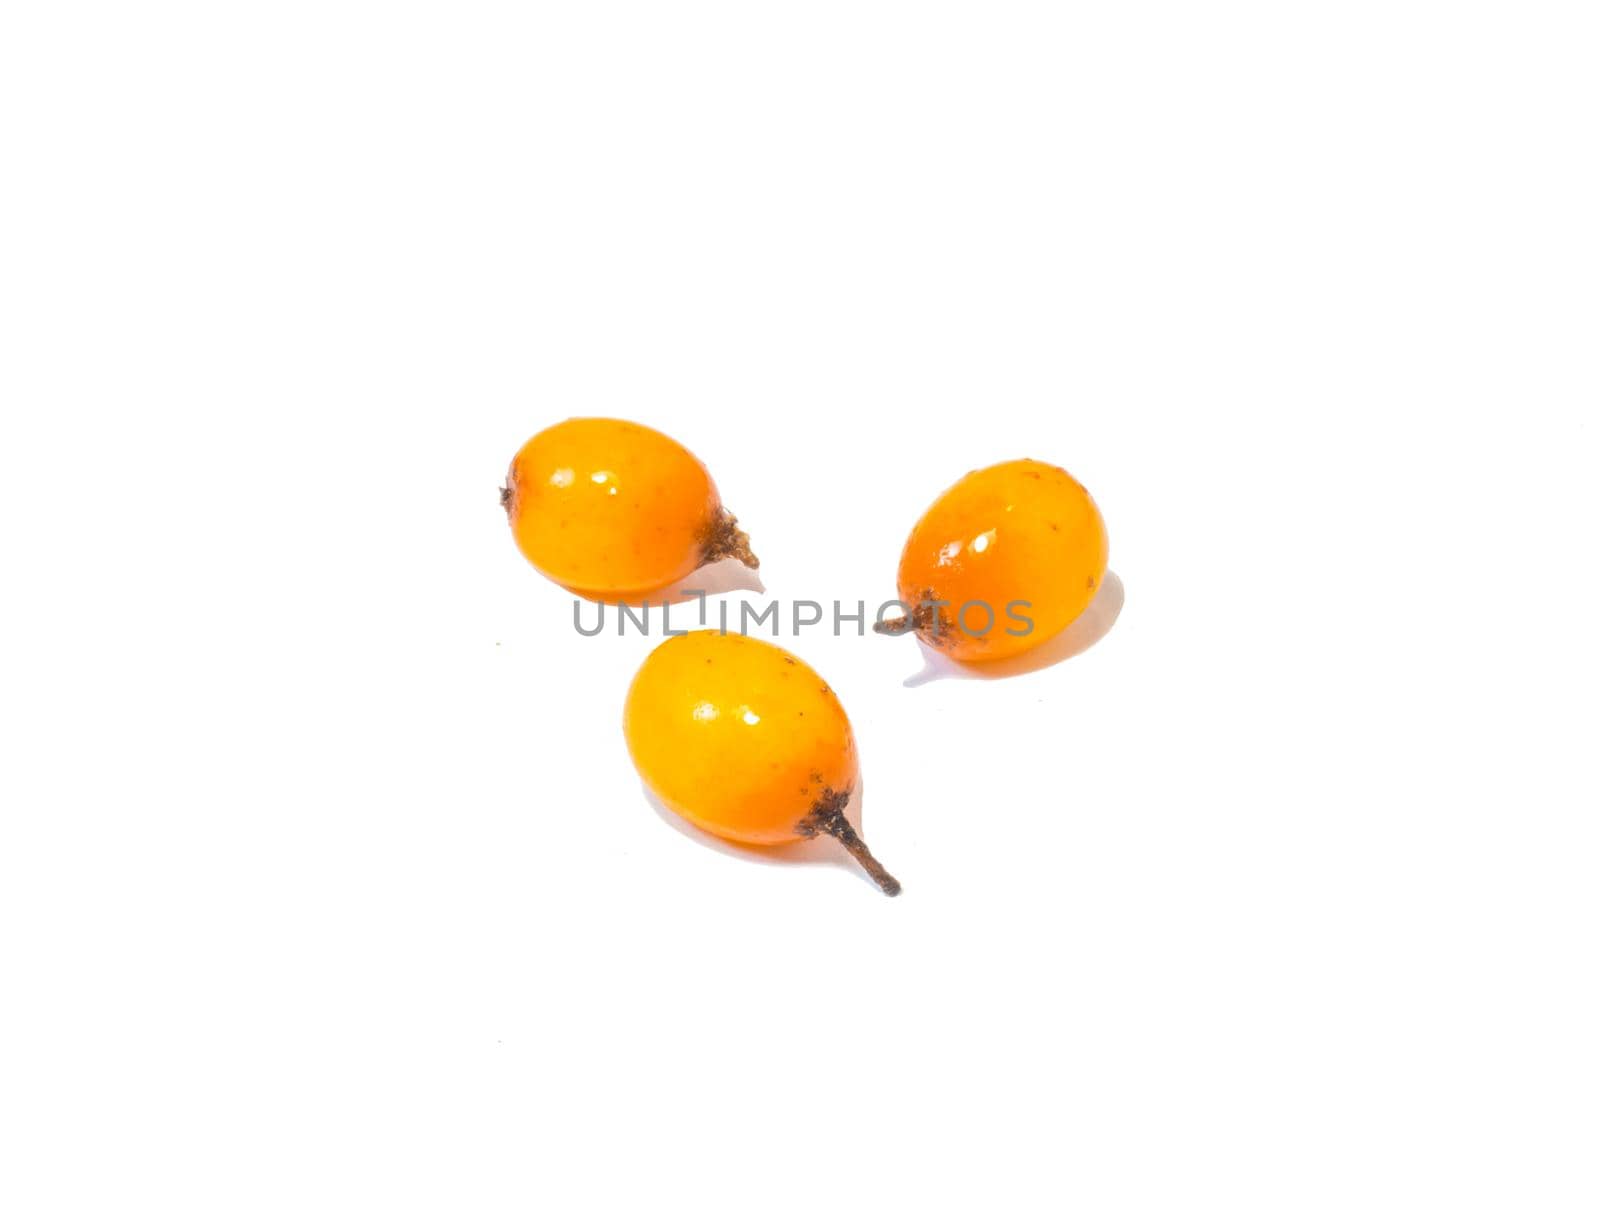 sea ​​buckthorn on a white background. Useful berry